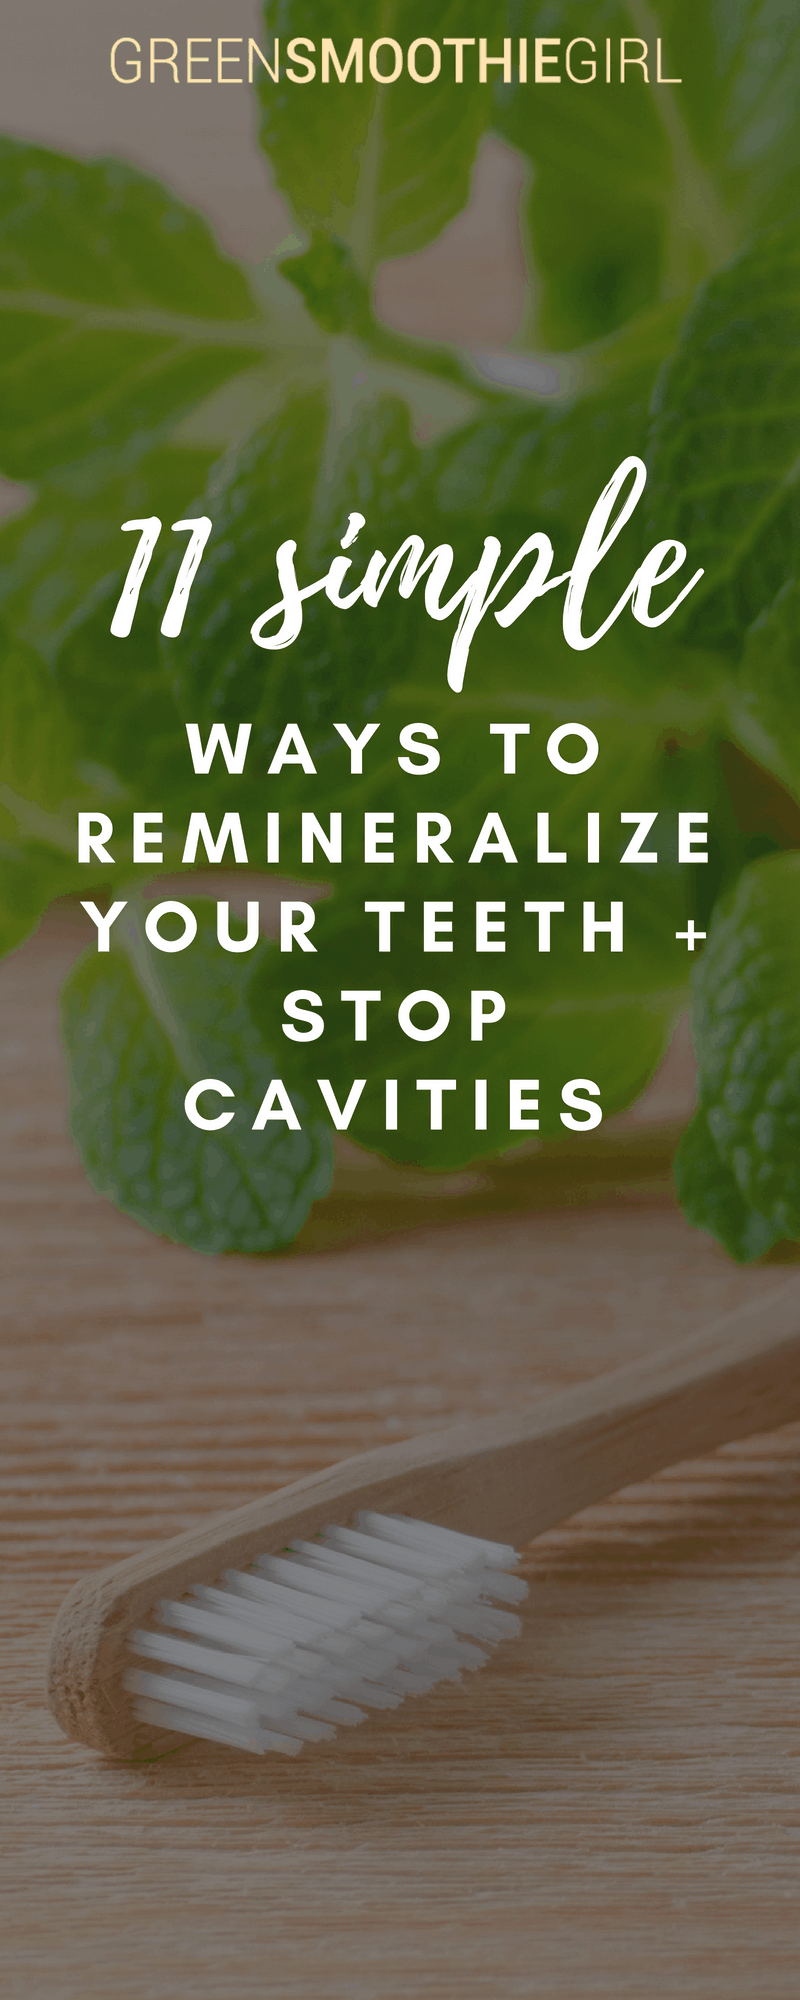 11 Ways to Remineralize Your Teeth & Stop Cavities | Green Smoothie Girl